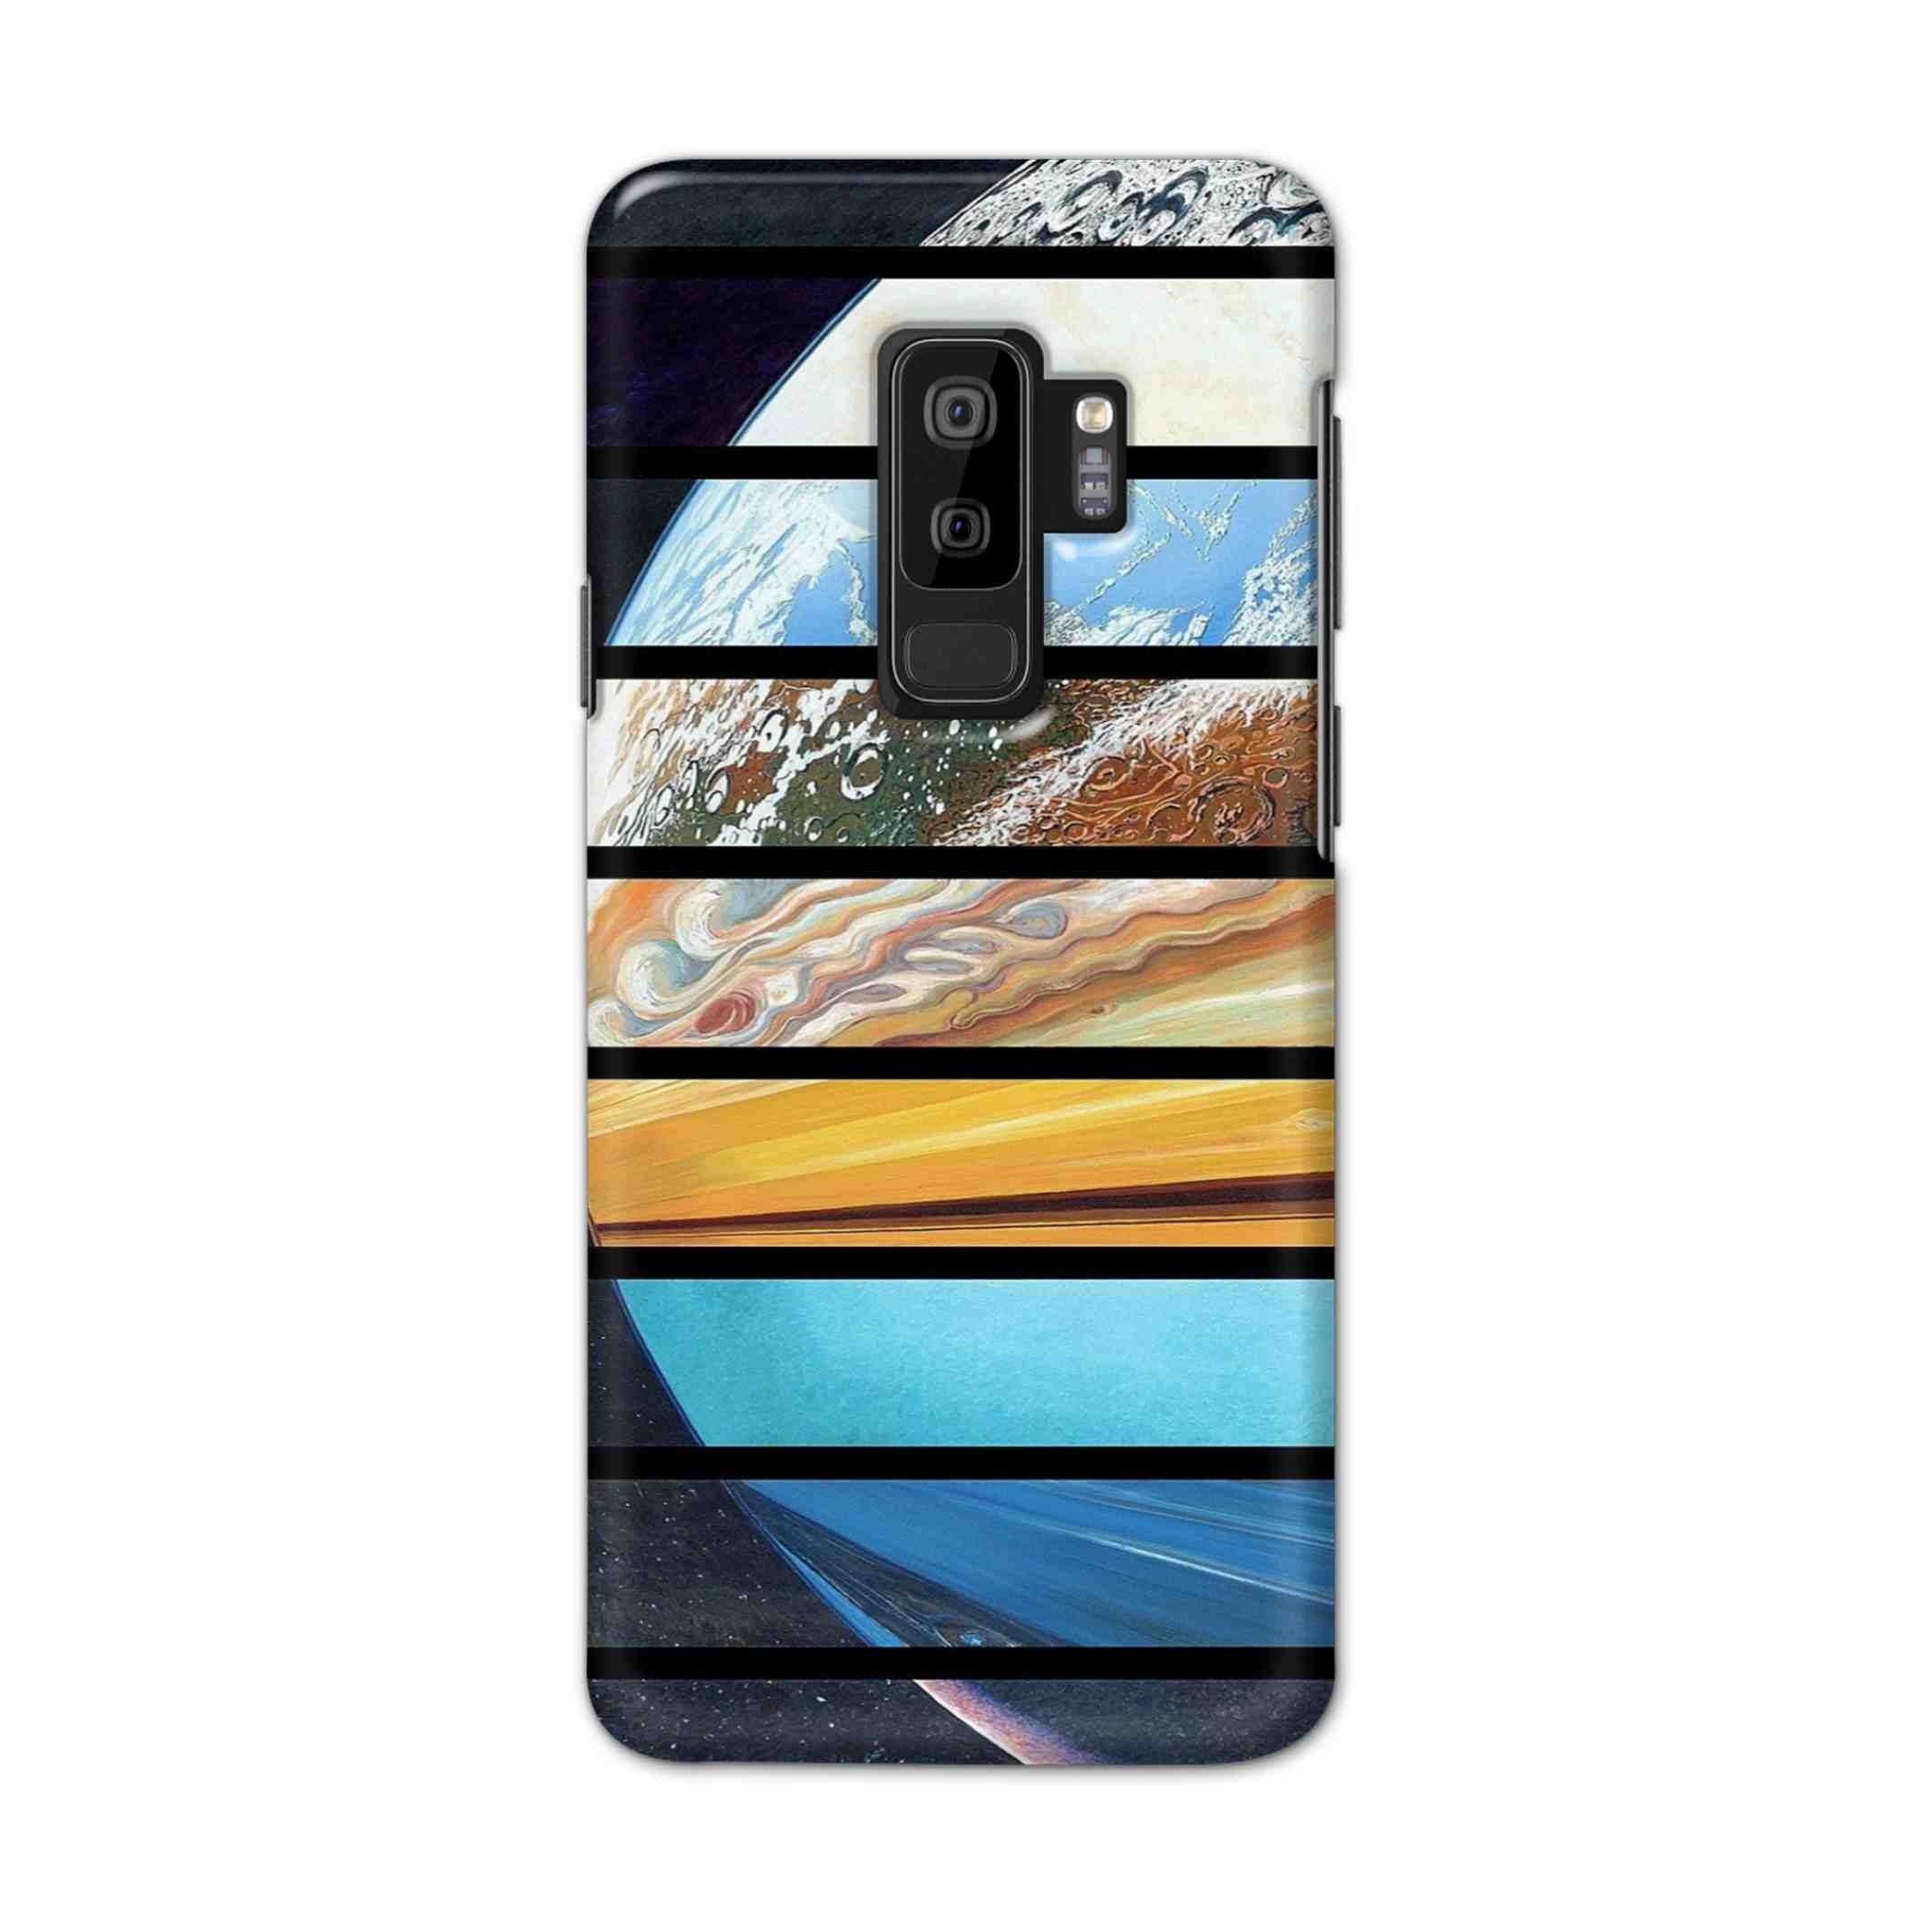 Buy Colourful Earth Hard Back Mobile Phone Case Cover For Samsung S9 plus Online